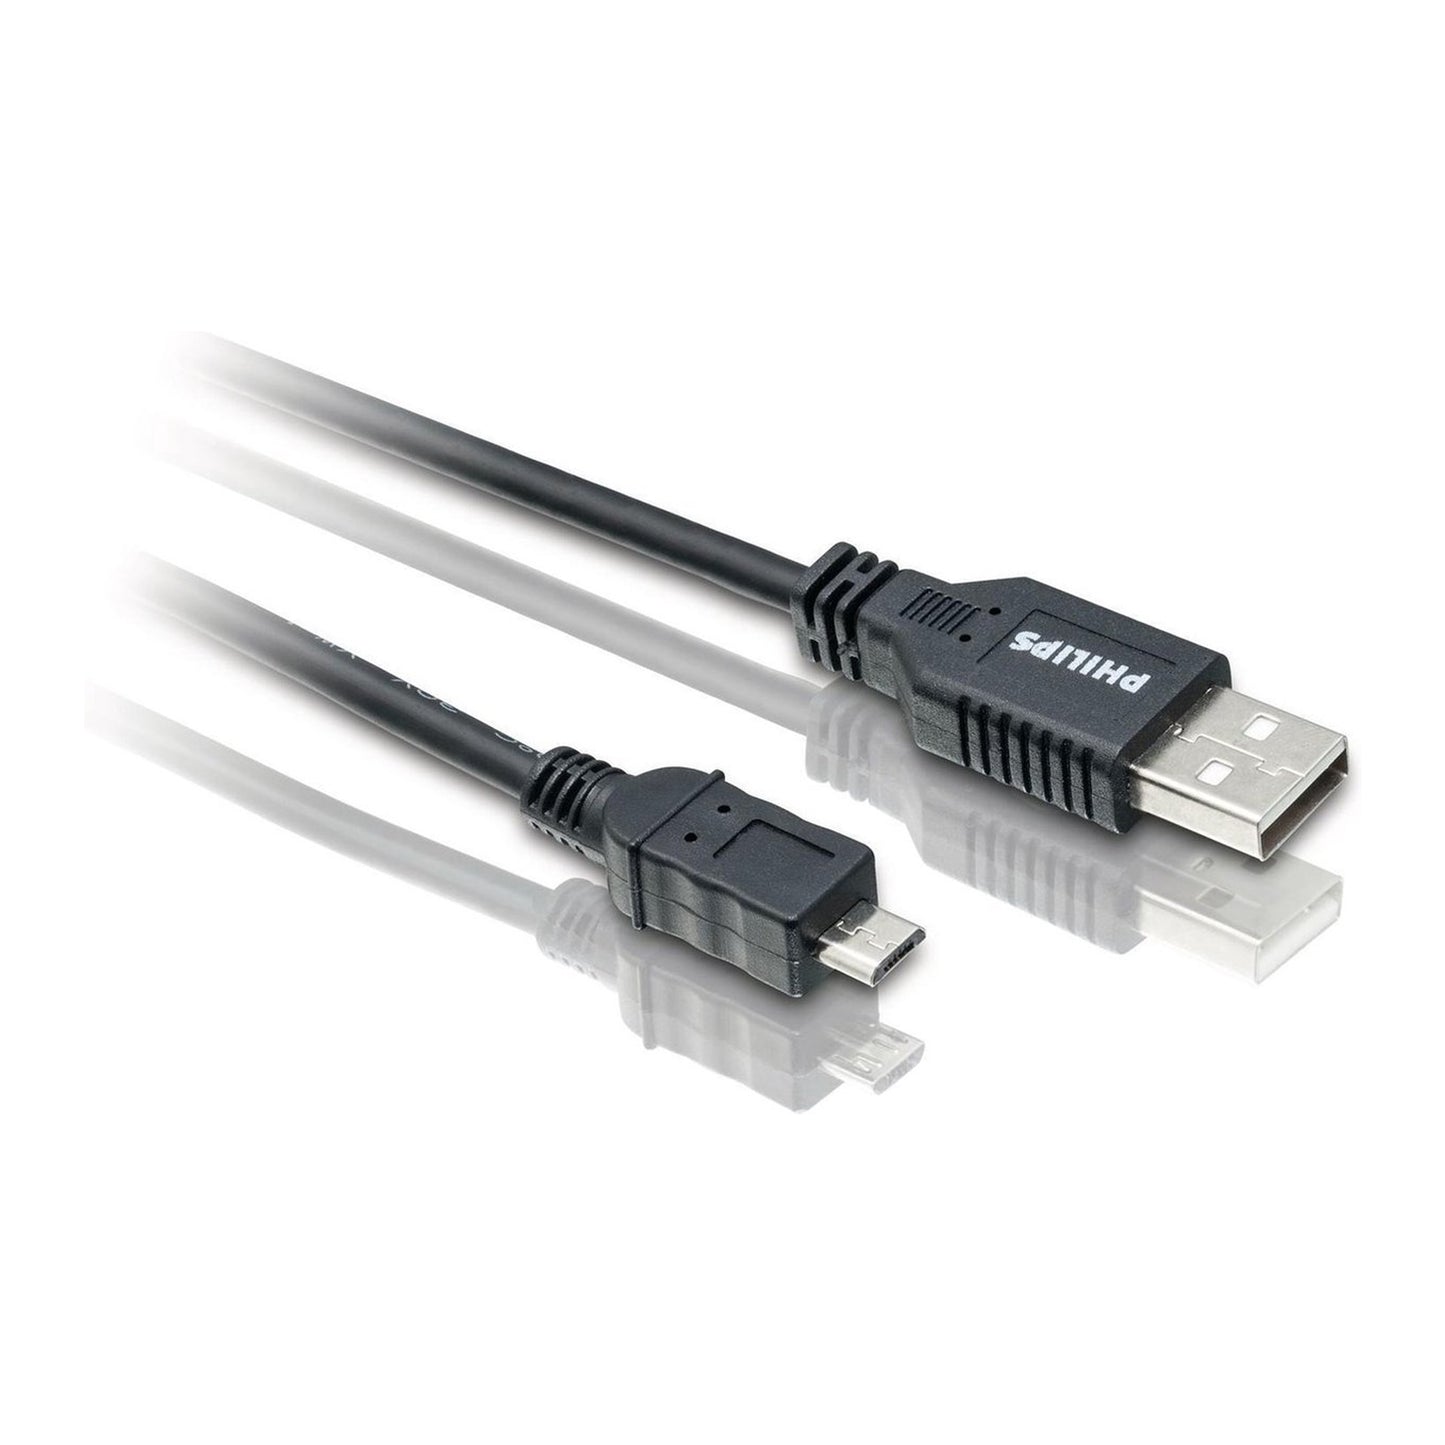 Philips Micro USB Cable 1.8m SWU2162/10